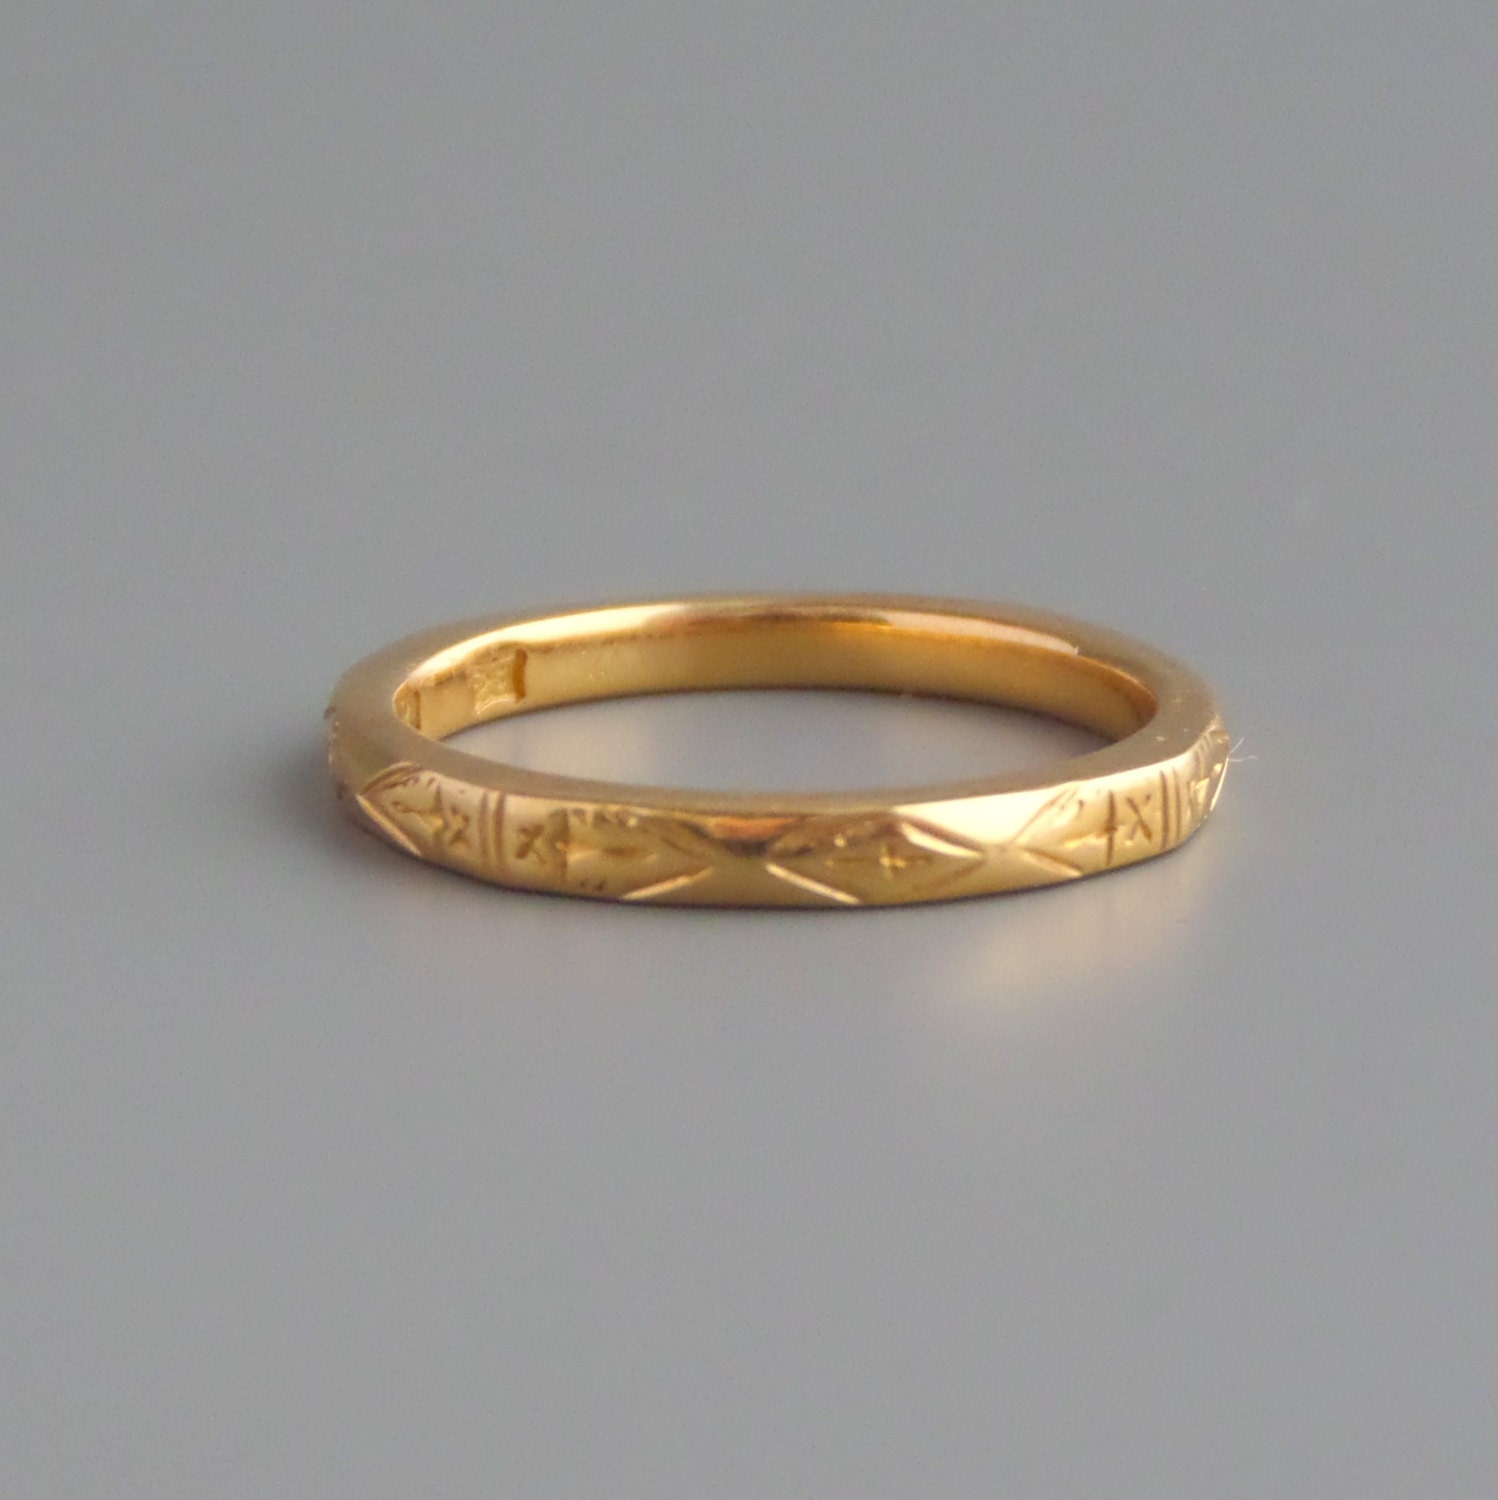 RESERVED Antique Georgian Gold  Ring  1815 English  Gold  